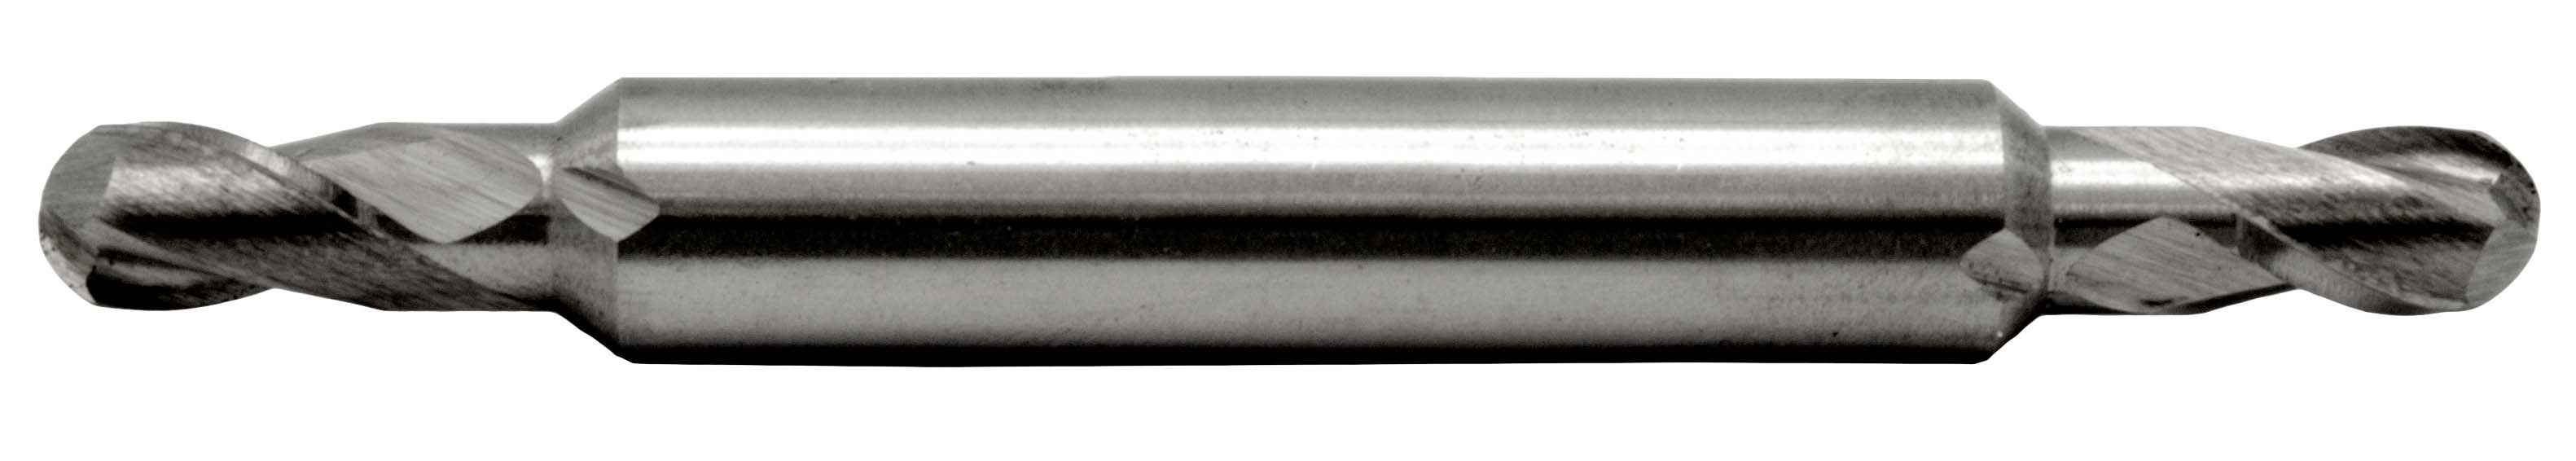 Cobalt Two Flute Double End End Mills